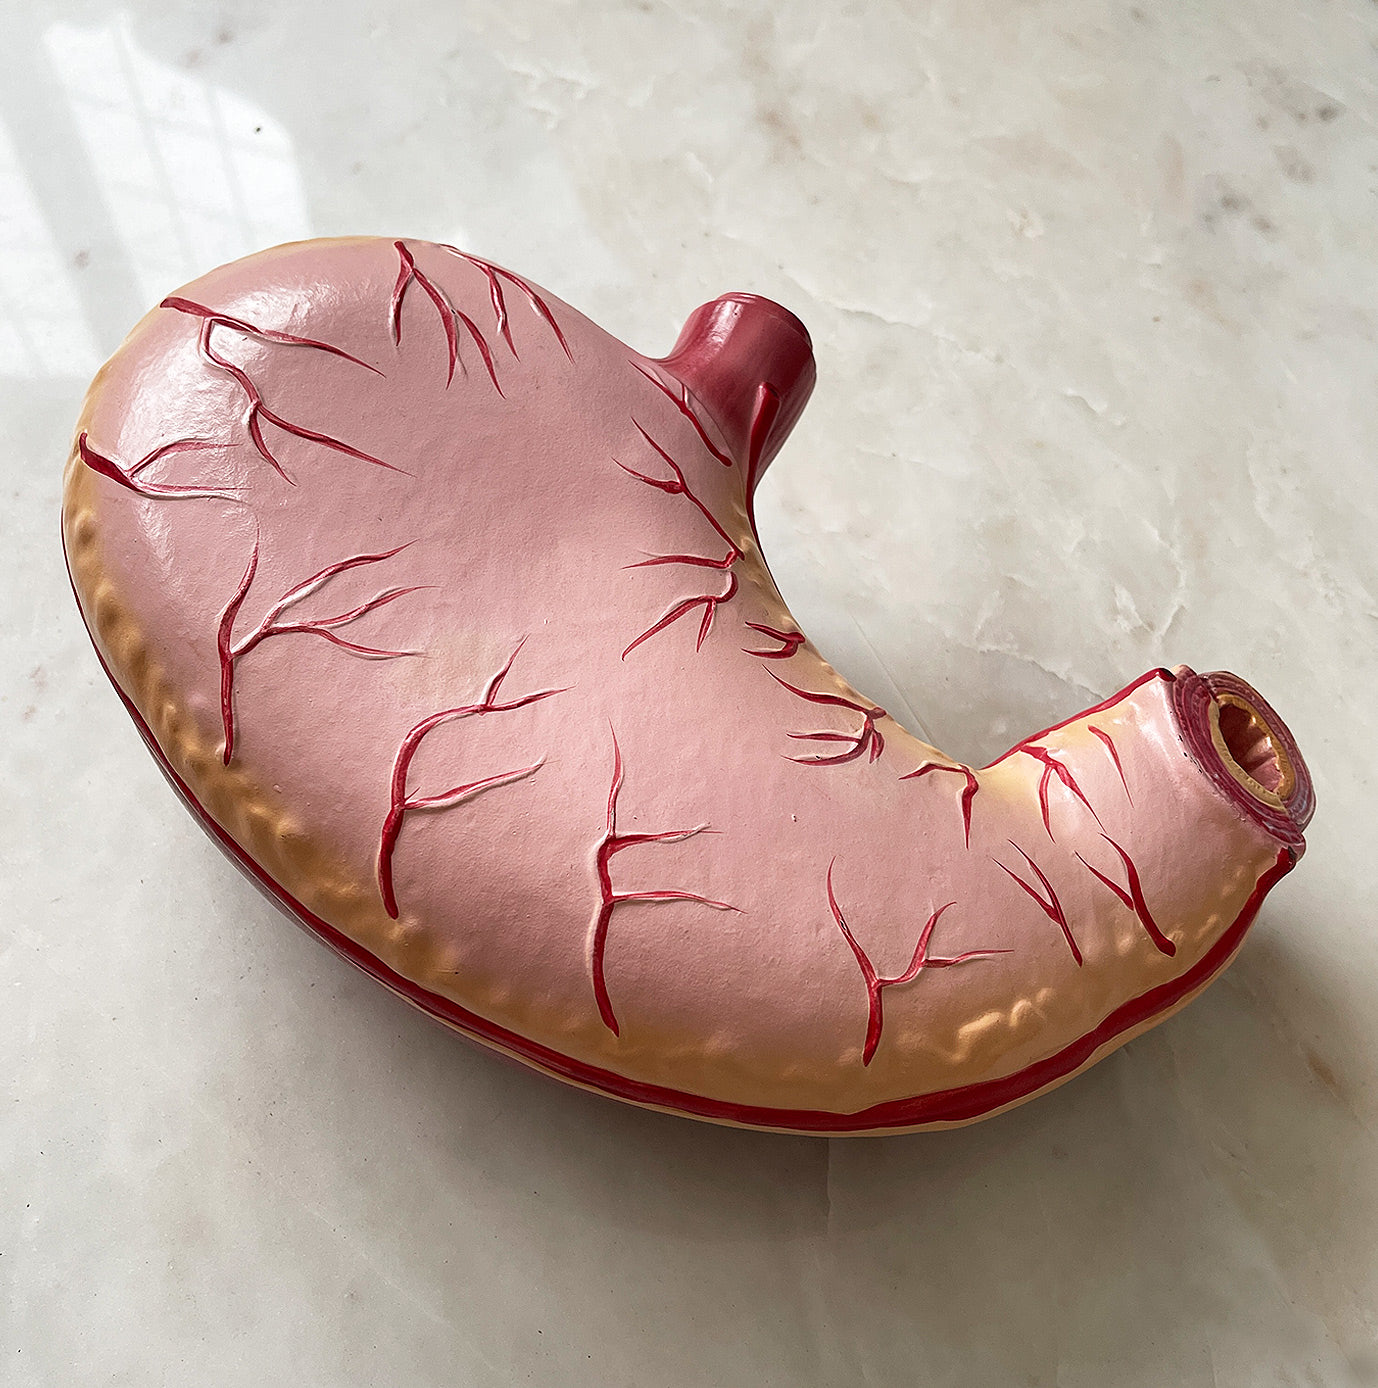 An Anatomical Stomach Teaching Aid. It has two halves which attach together with metal pins. This would have been used as a teaching aid for doctors and surgeons - SHOP NOW - www.intovintage.co.uk